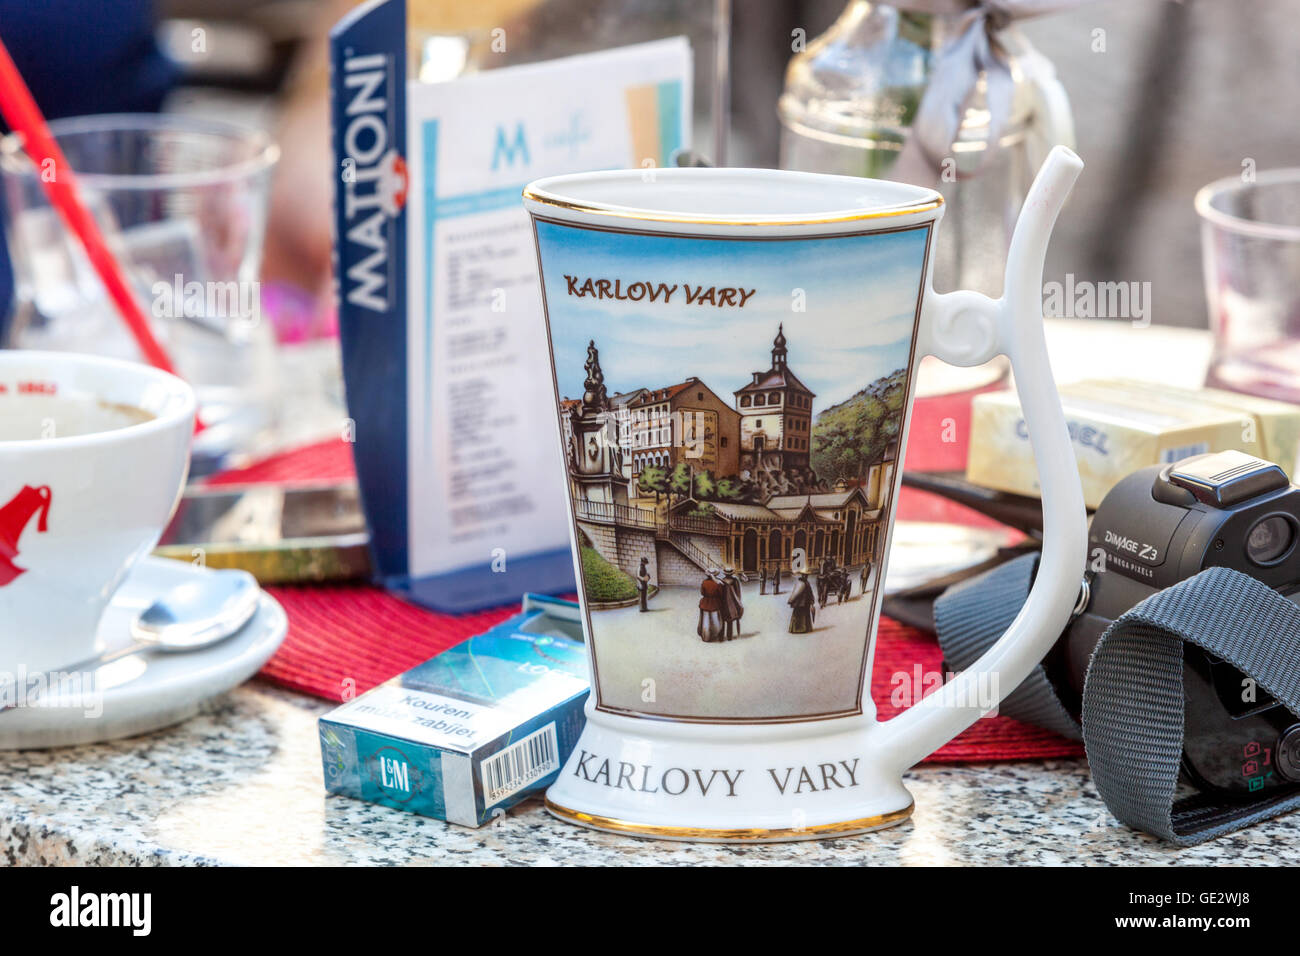 Traditional porcelain cup on the table, restaurant, Karlovy Vary Czech Republic Stock Photo